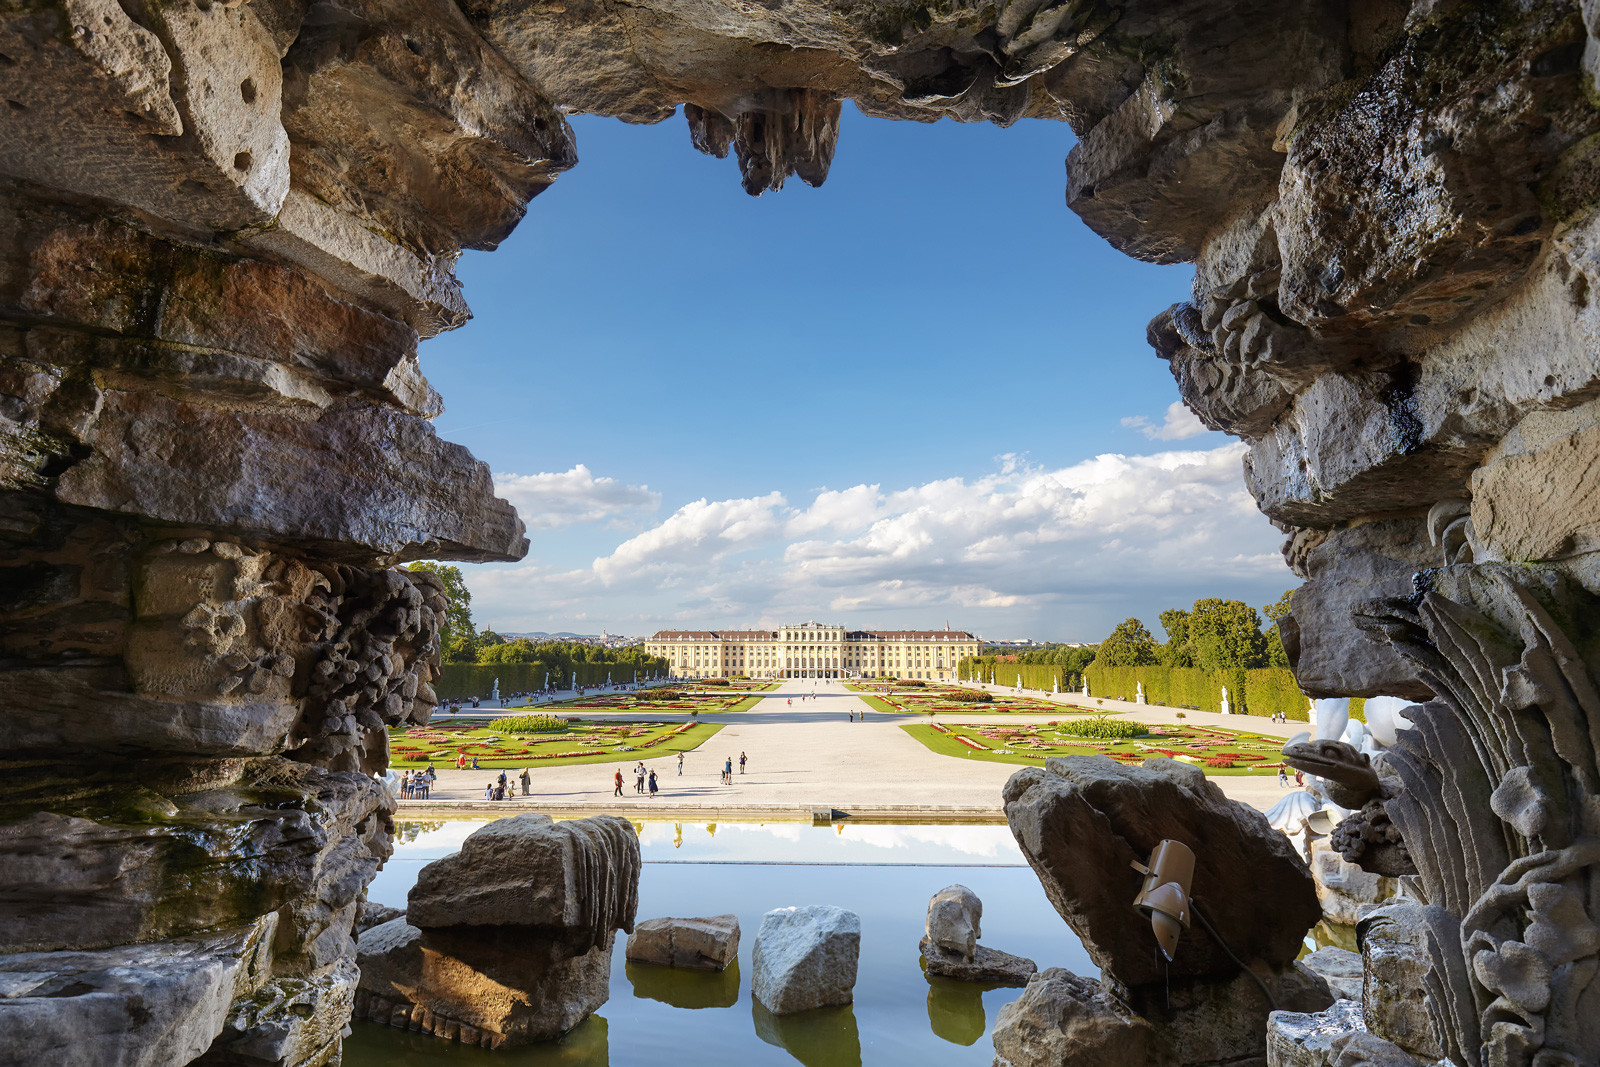 Schonbrunn Palace in Vienna, once a residence of the ruling Habsburgs, is open for tours.